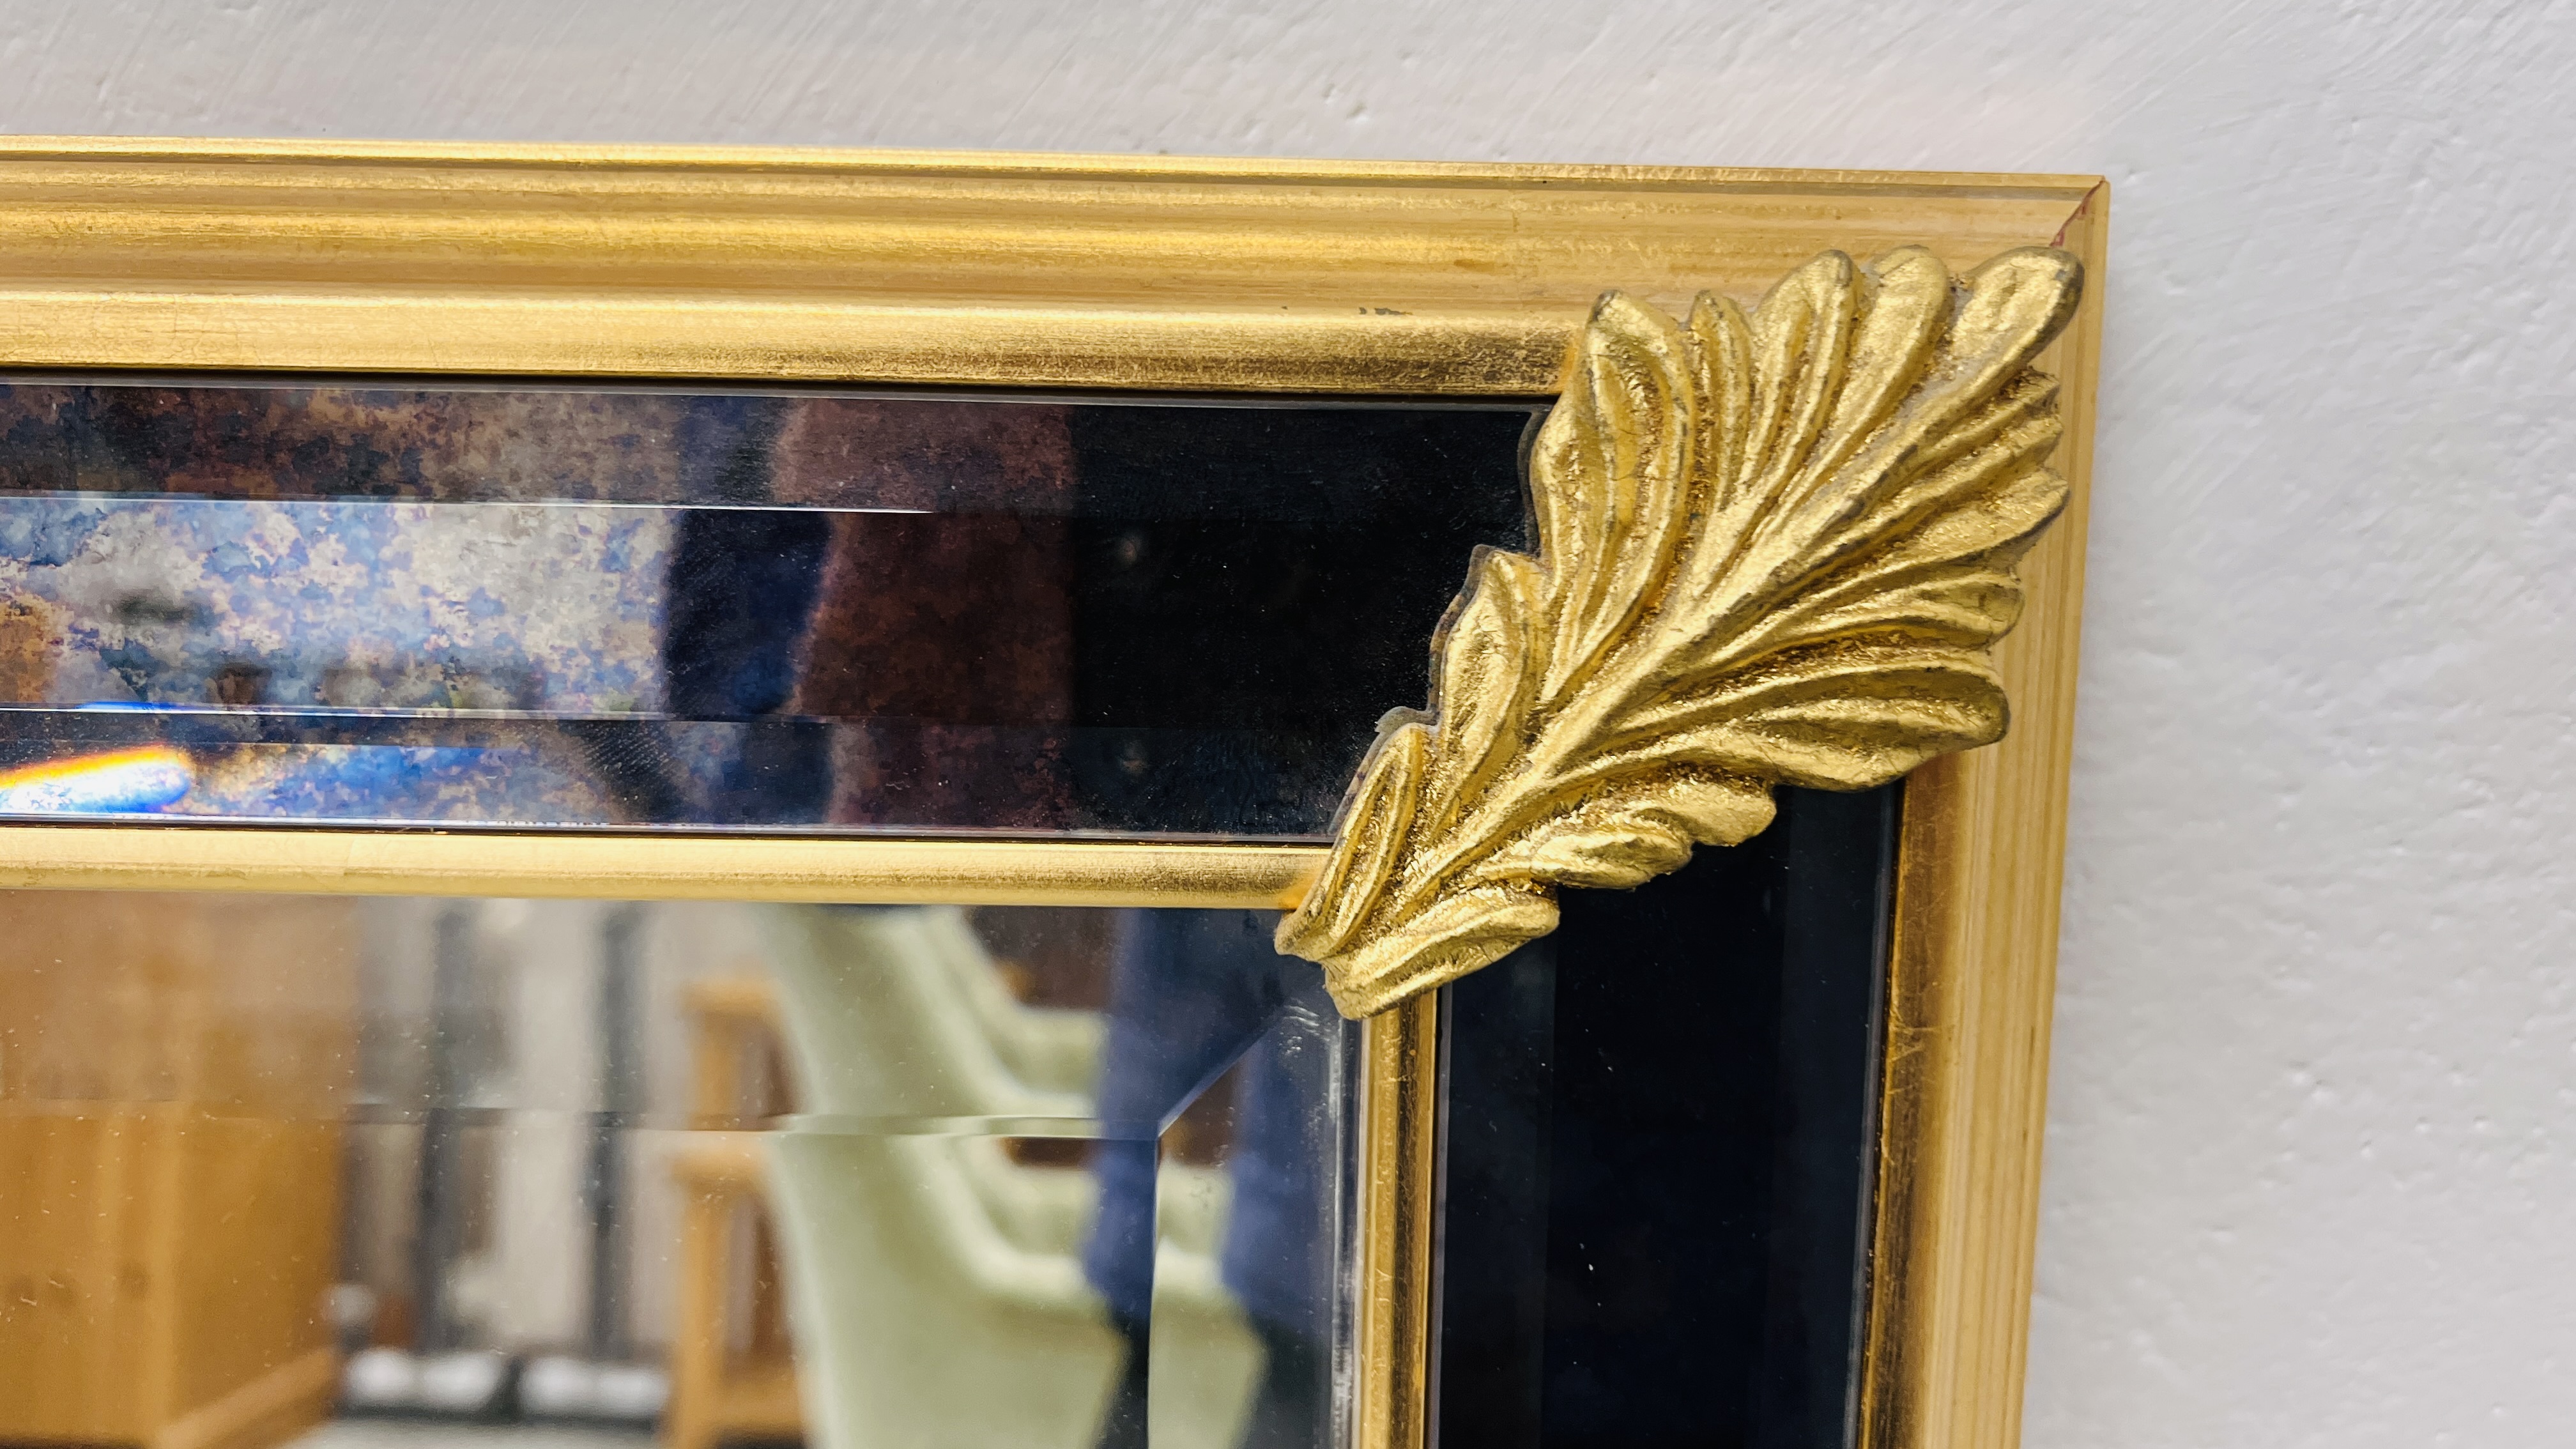 LARGE DESIGNER GILT FRAMED WALL MIRROR WITH BEVELLED GLASS WIDTH 104CM. HEIGHT 127CM. - Image 3 of 6